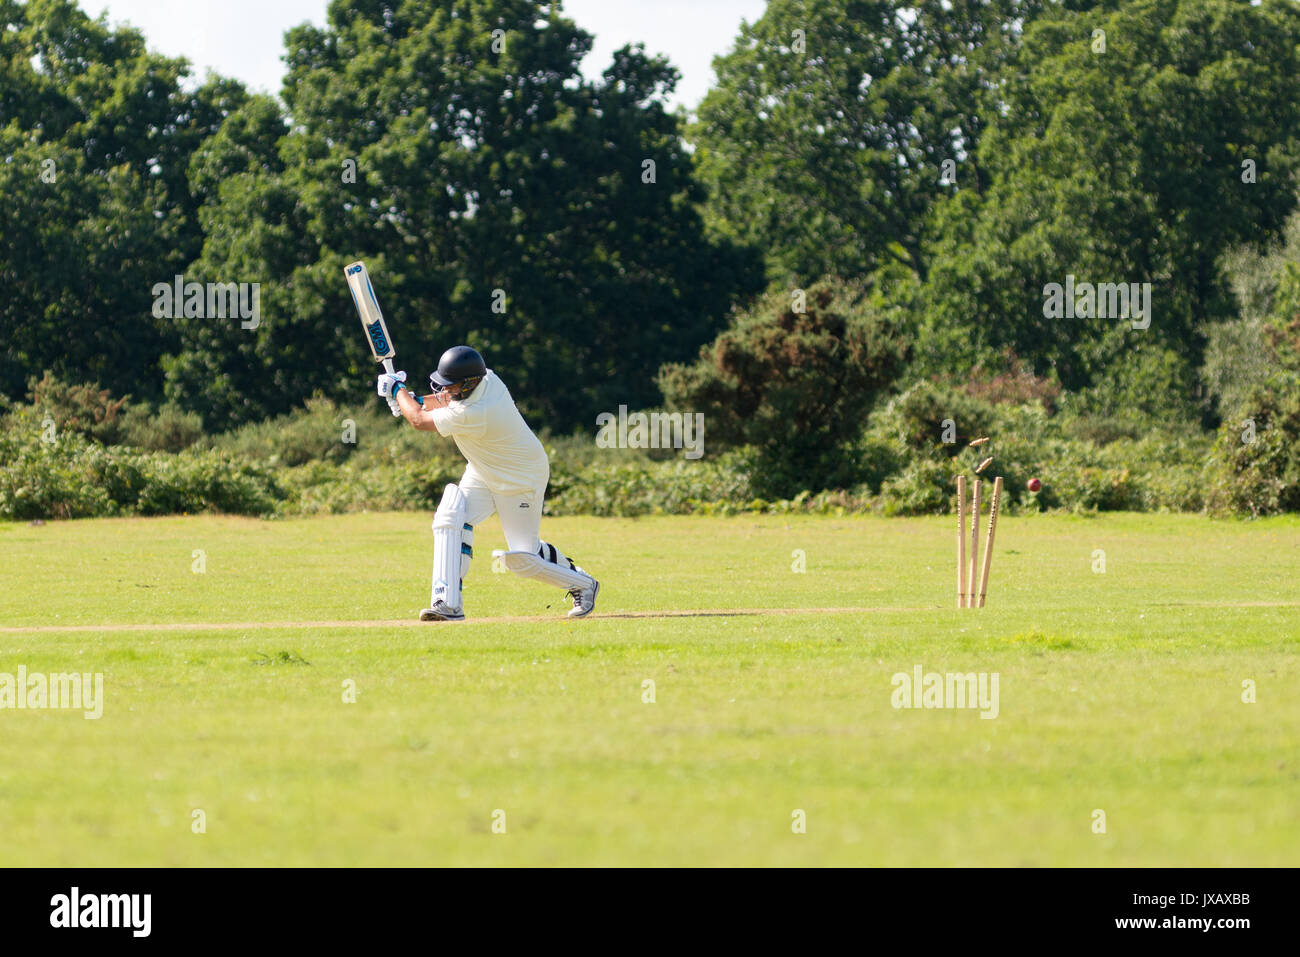 A cricket ball smashes through the wickets sending the bails flying after a missed shot by the batsman during a village match in the New Forest, UK. Stock Photo